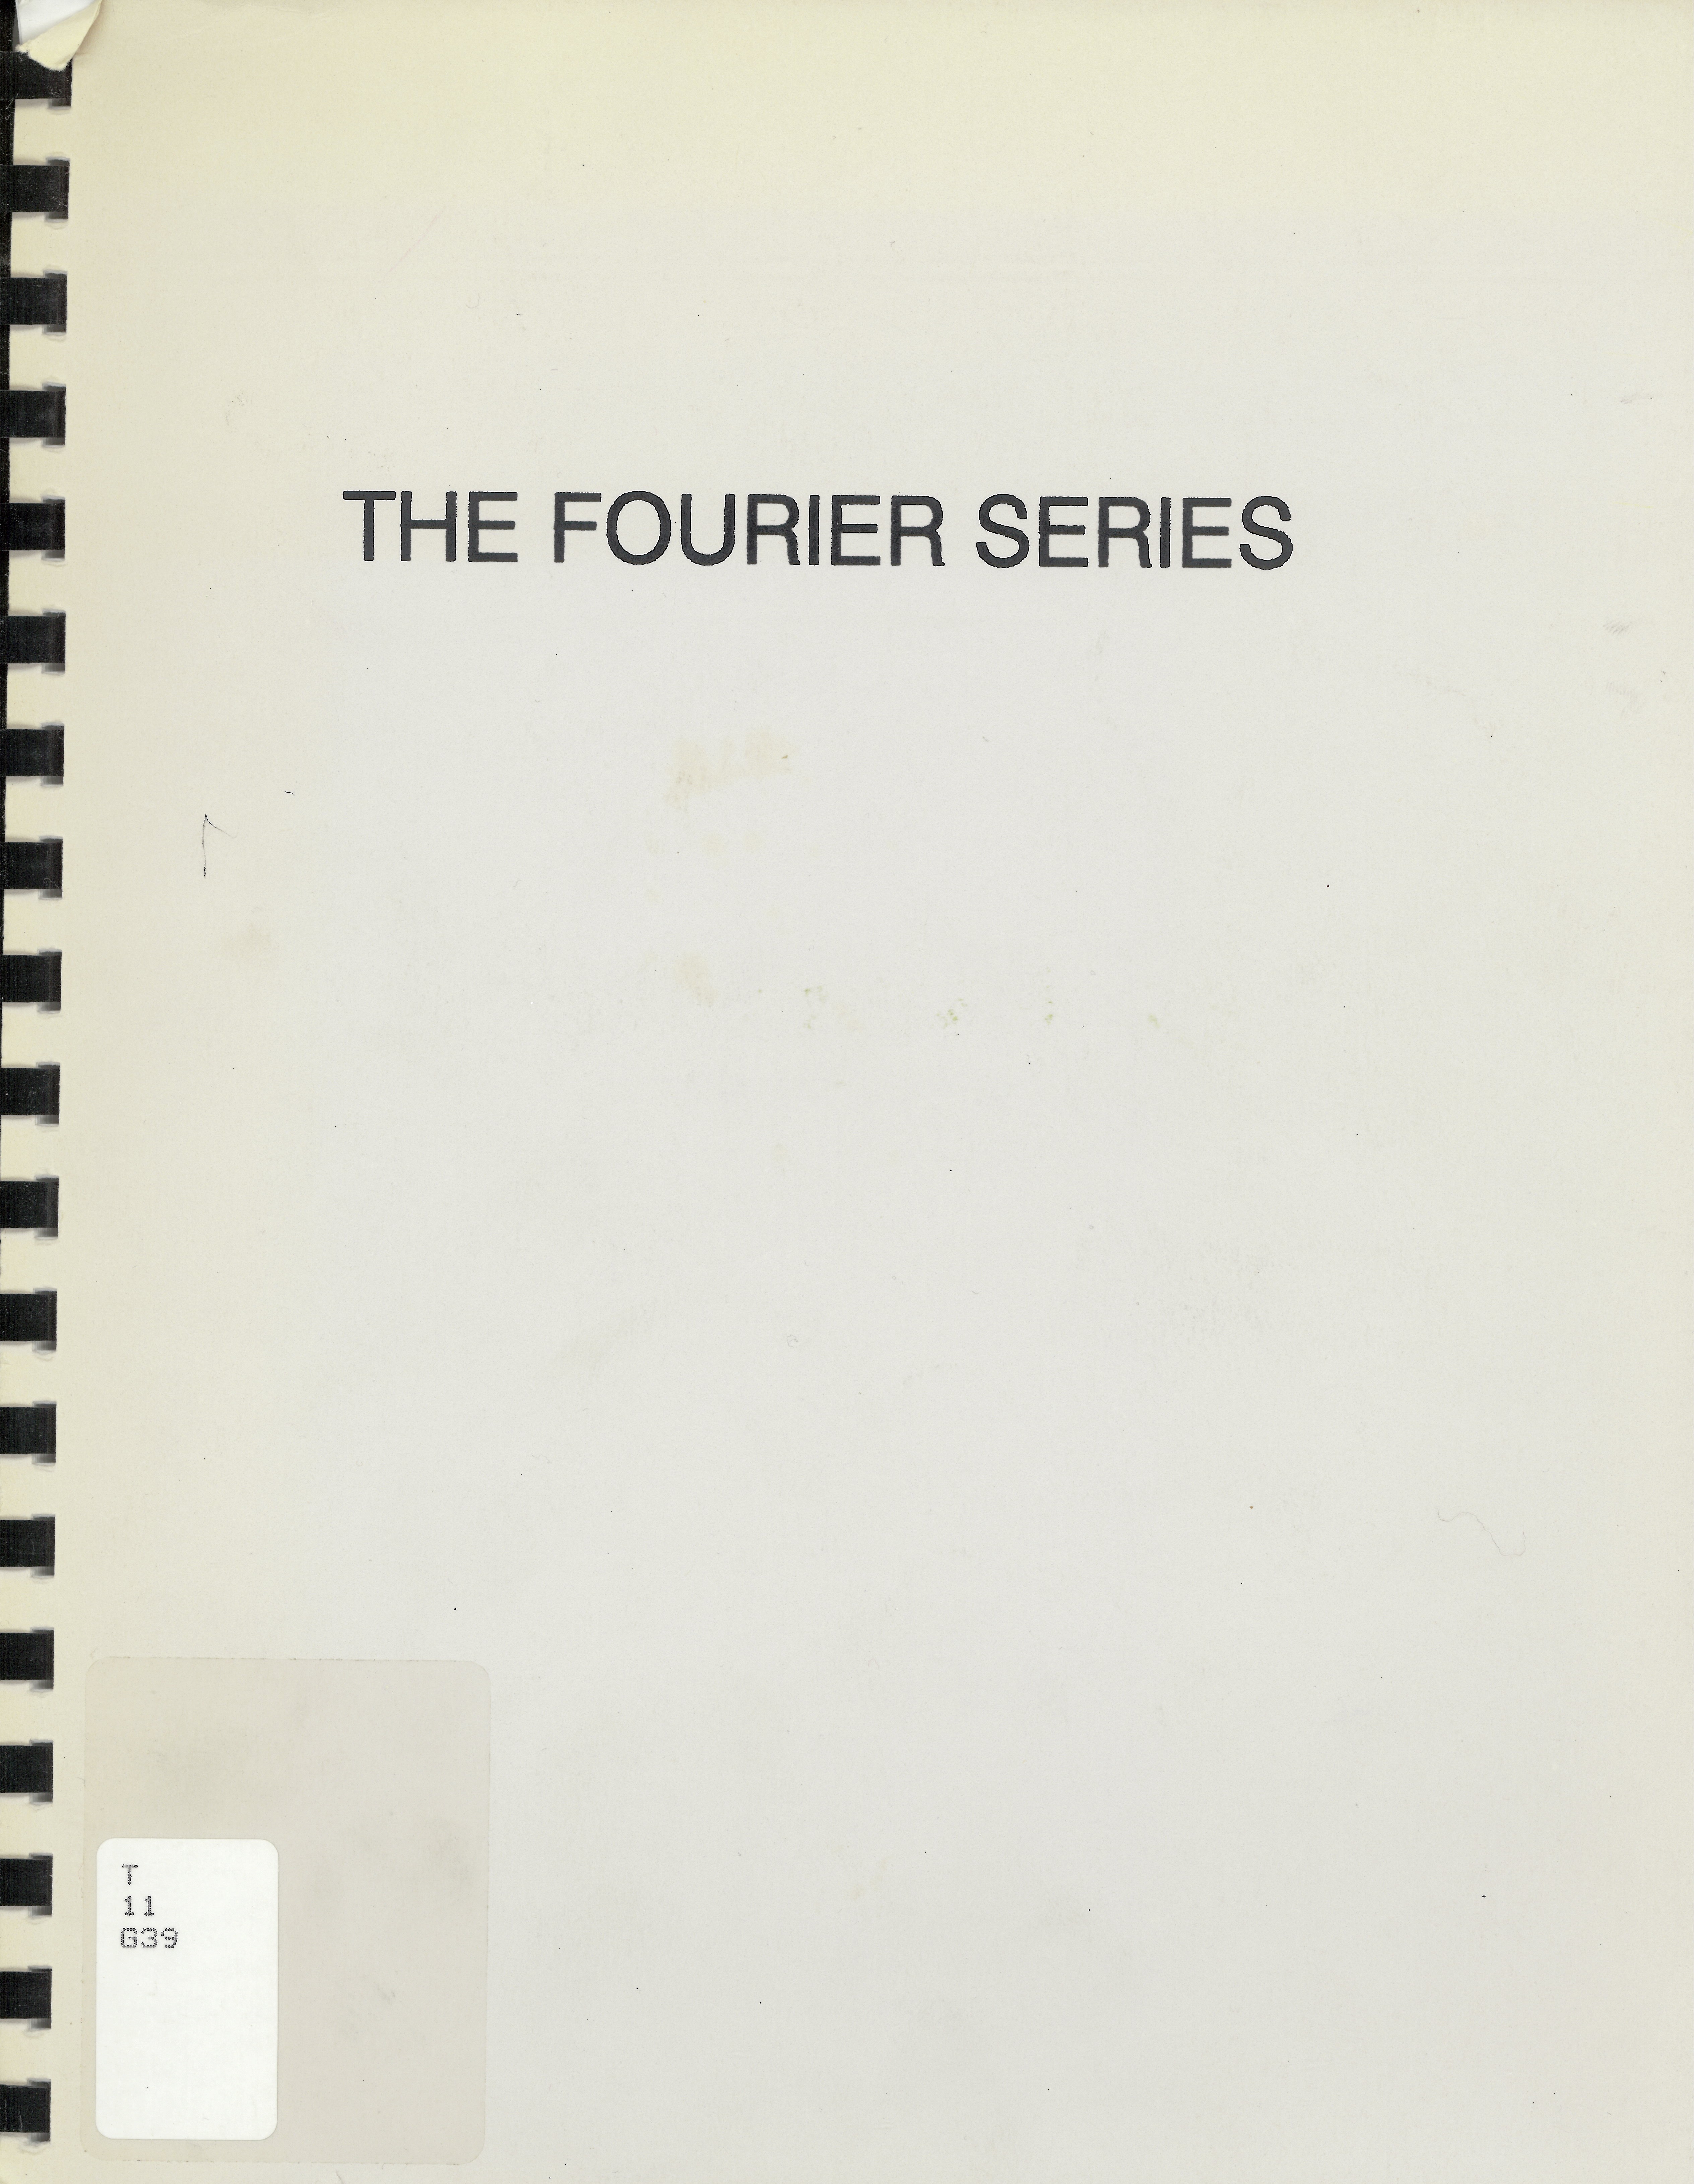 The Fourier series